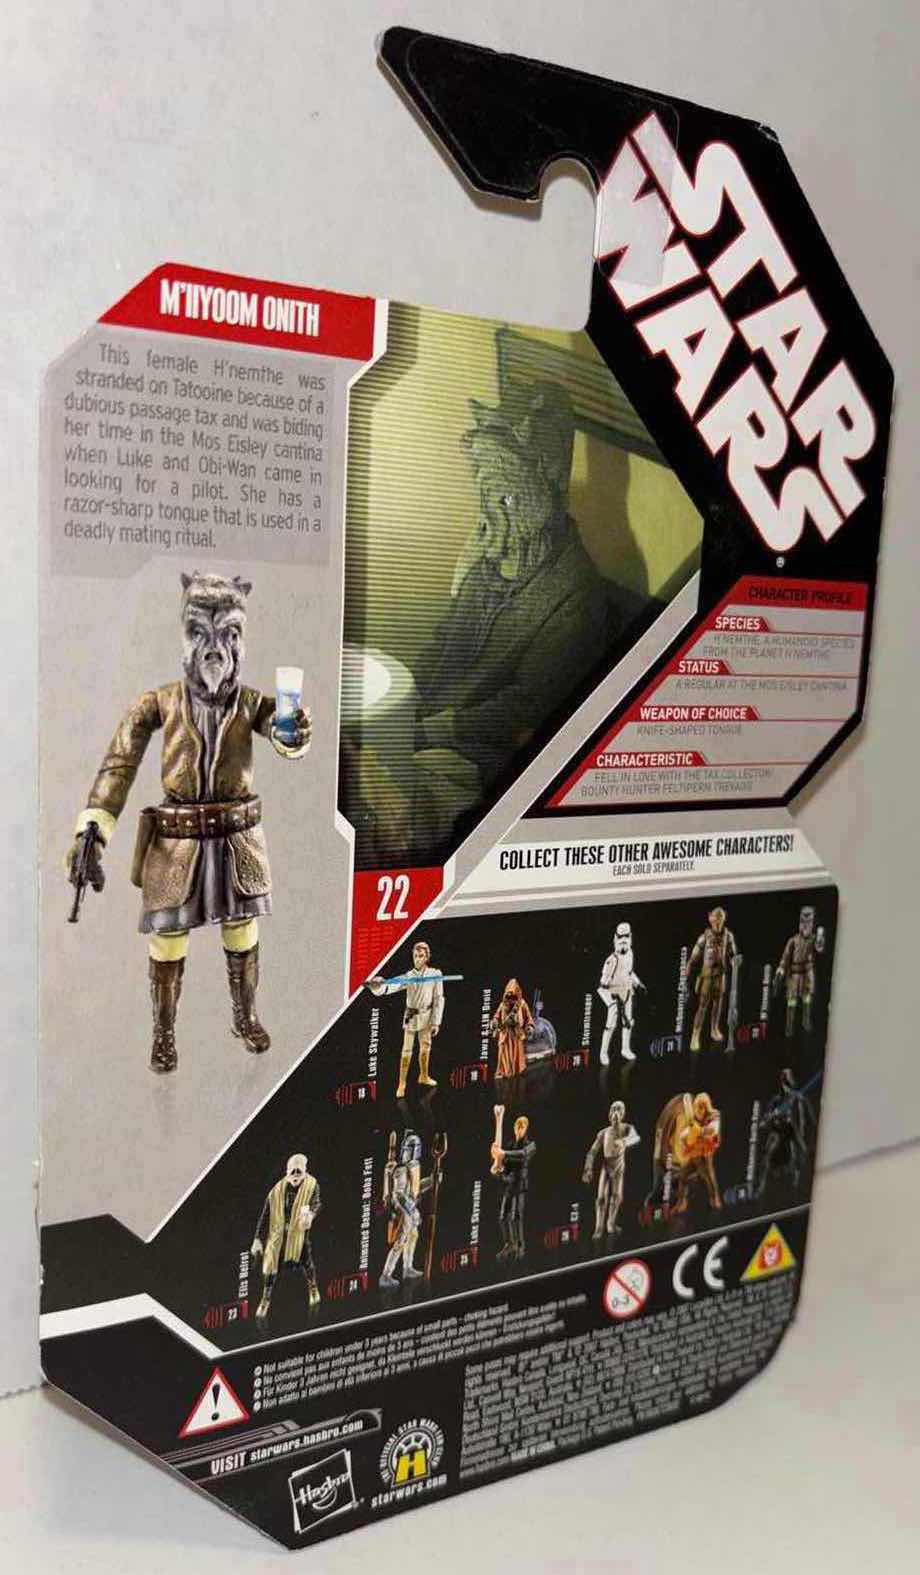 Photo 3 of NEW 2007 HASBRO STAR WARS 30TH ANNIVERSARY A NEW HOPE FIGURE & ACCESSORIES “M’IIYOOM ONITH” W EXCLUSIVE COLLECTOR COIN